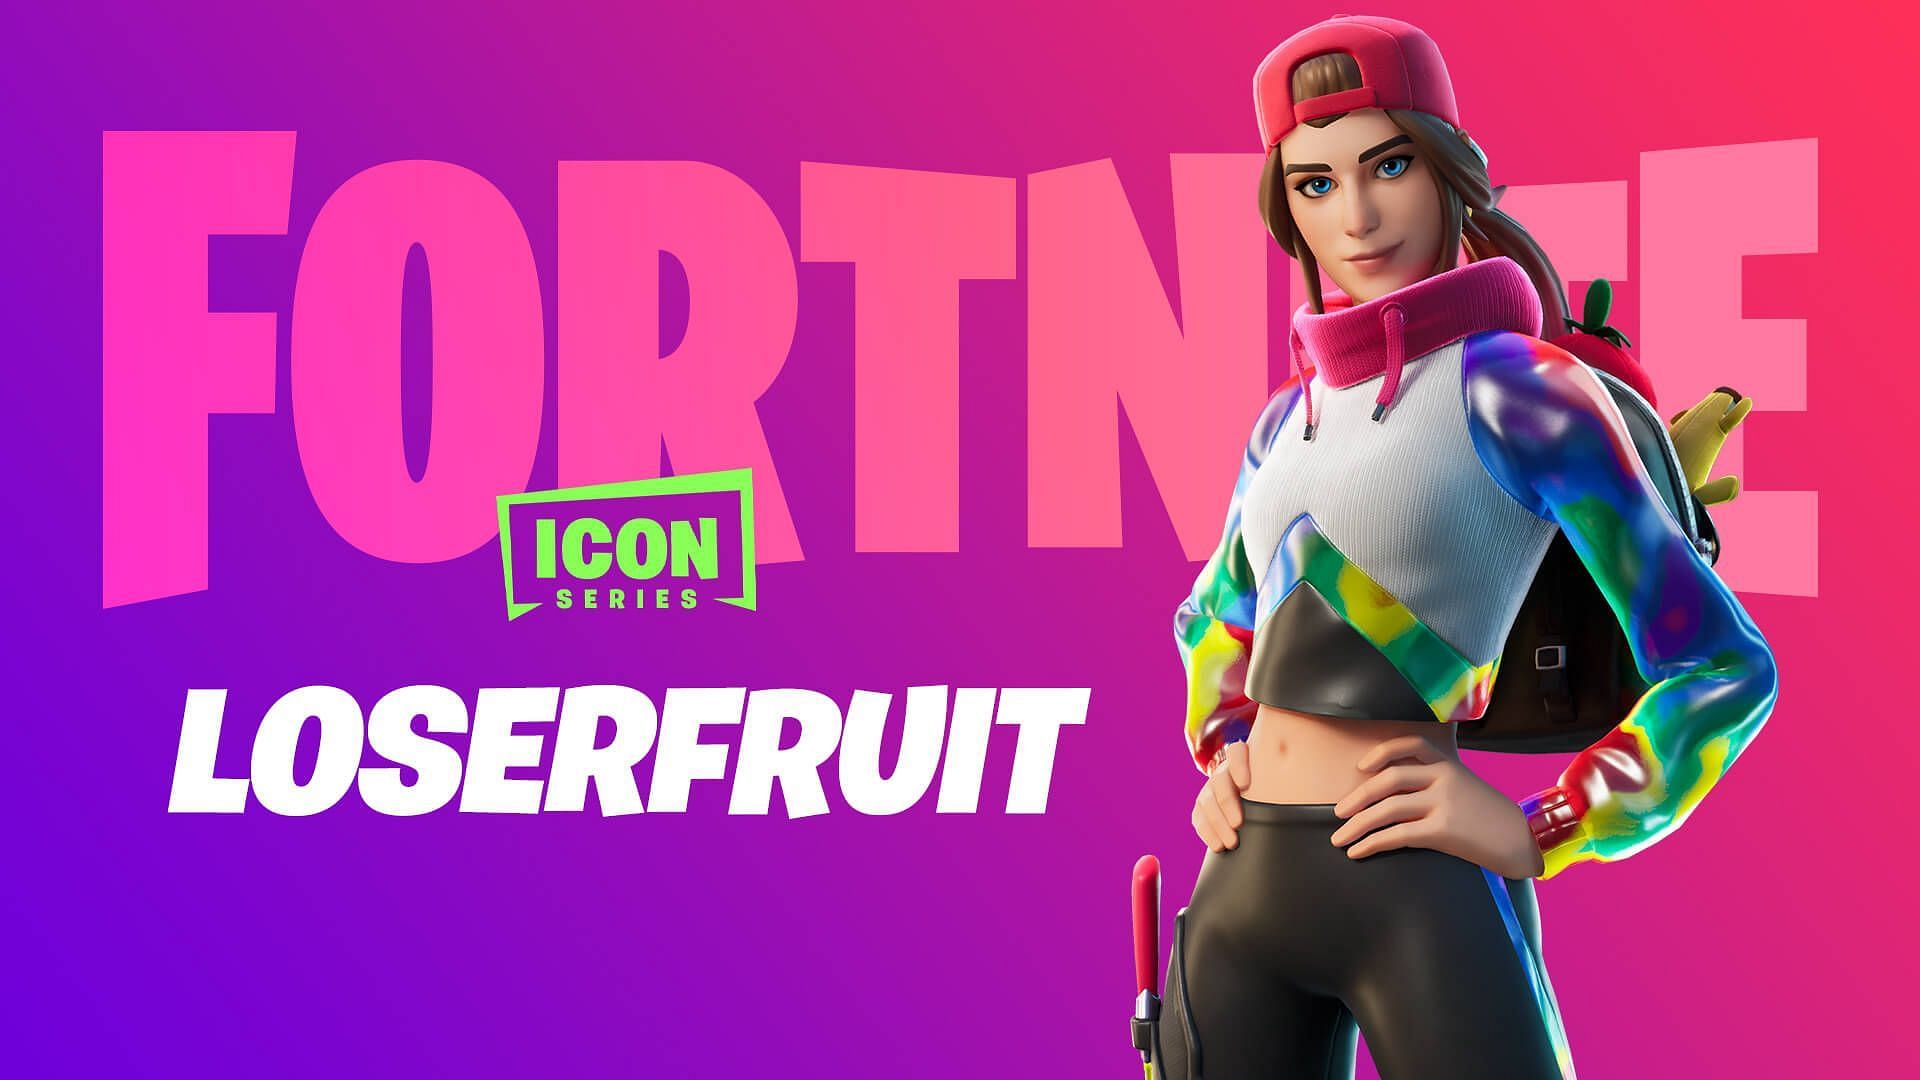 Loserfruit is part of a group of elite streamers to have their own skin in Fortnite (Image via Epic Games)